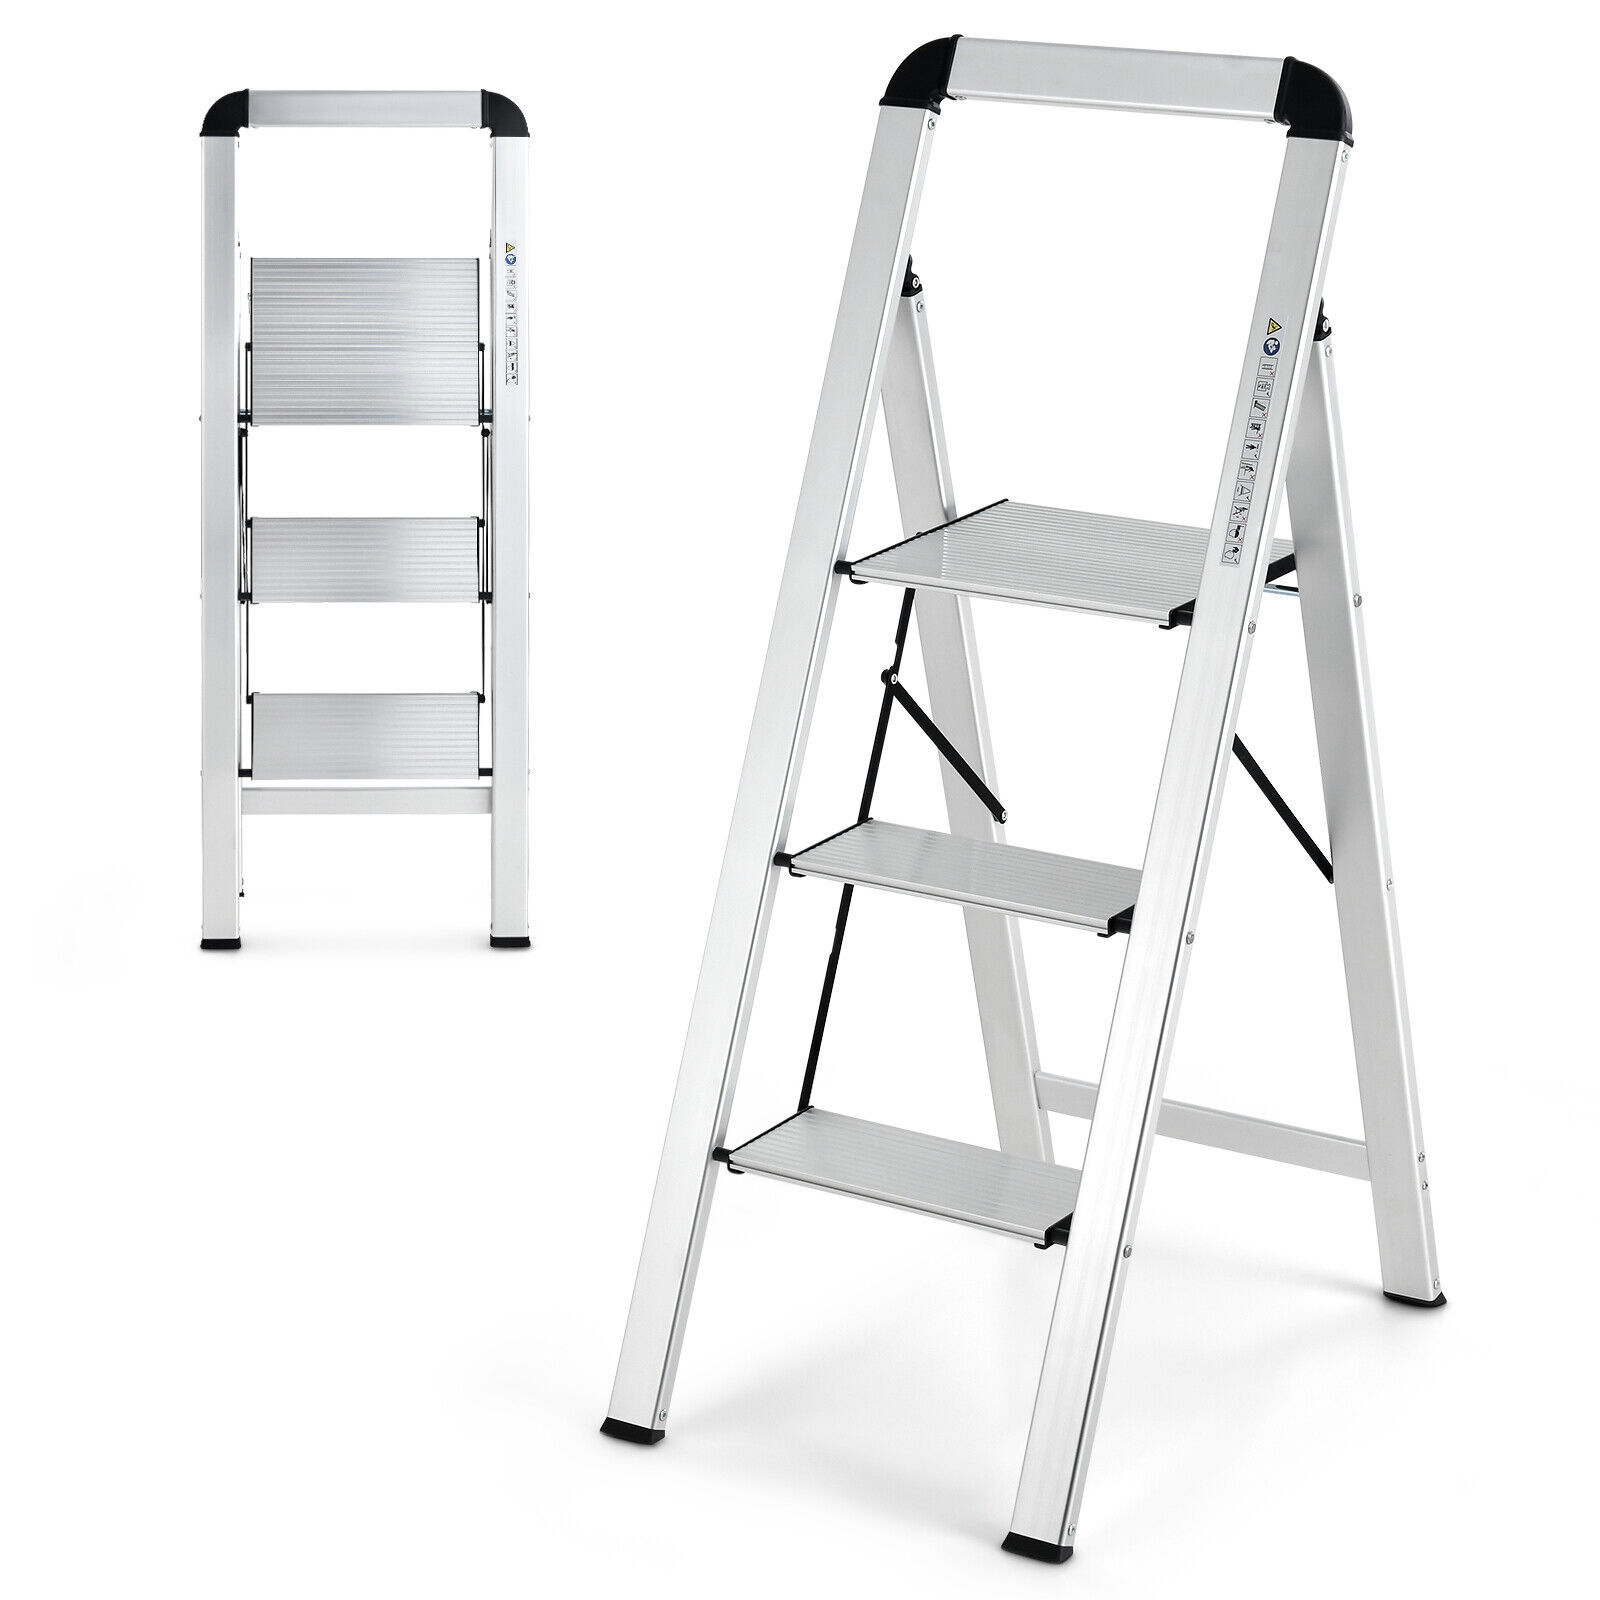 Primary image for 3 Step Ladder Aluminum Folding Step Stool 330lbs Lightweight w/ Non-Slip Pedal